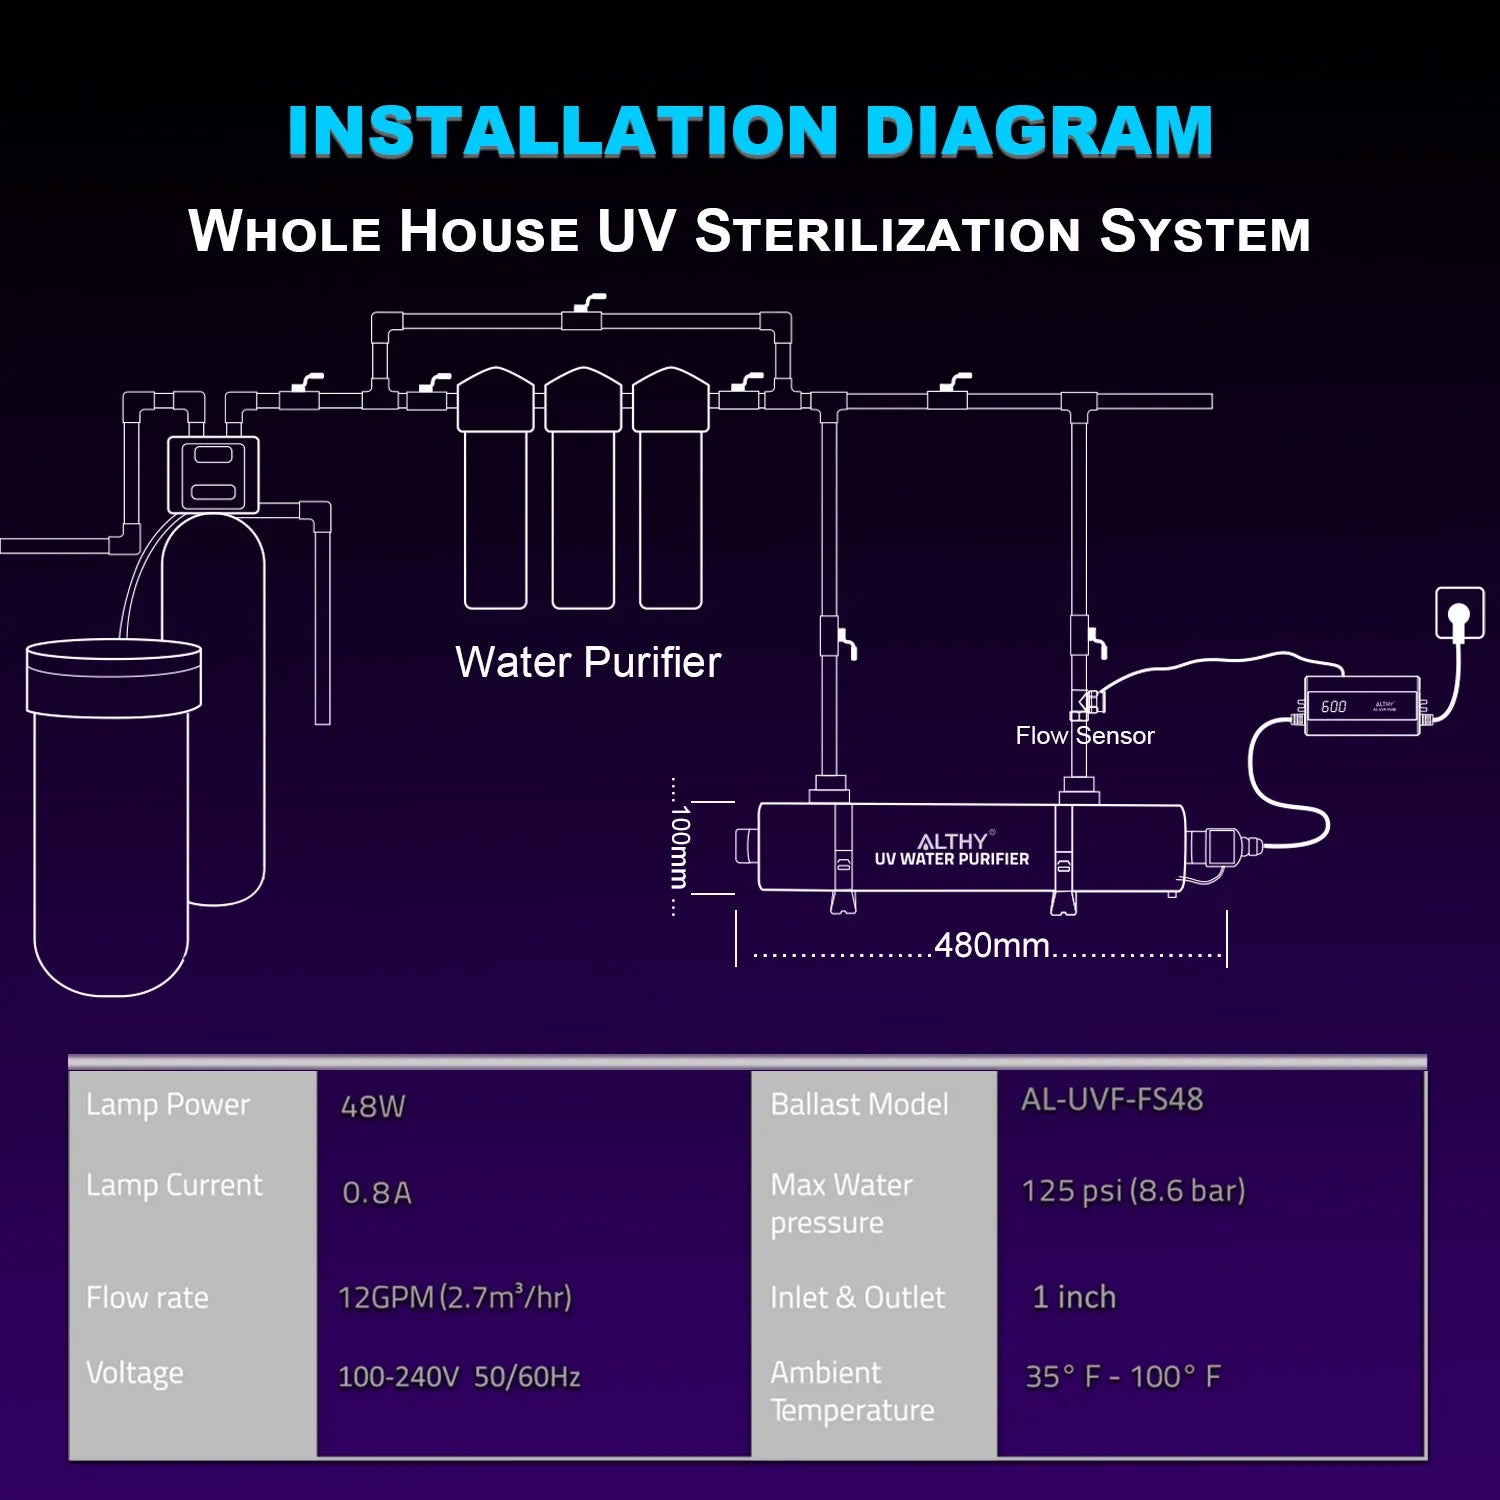 ALTHY Whole House UV Ultraviolet Water Sterilizer System Filter Purifier + Smart Flow Control Switch Stainless Steel 12GPM